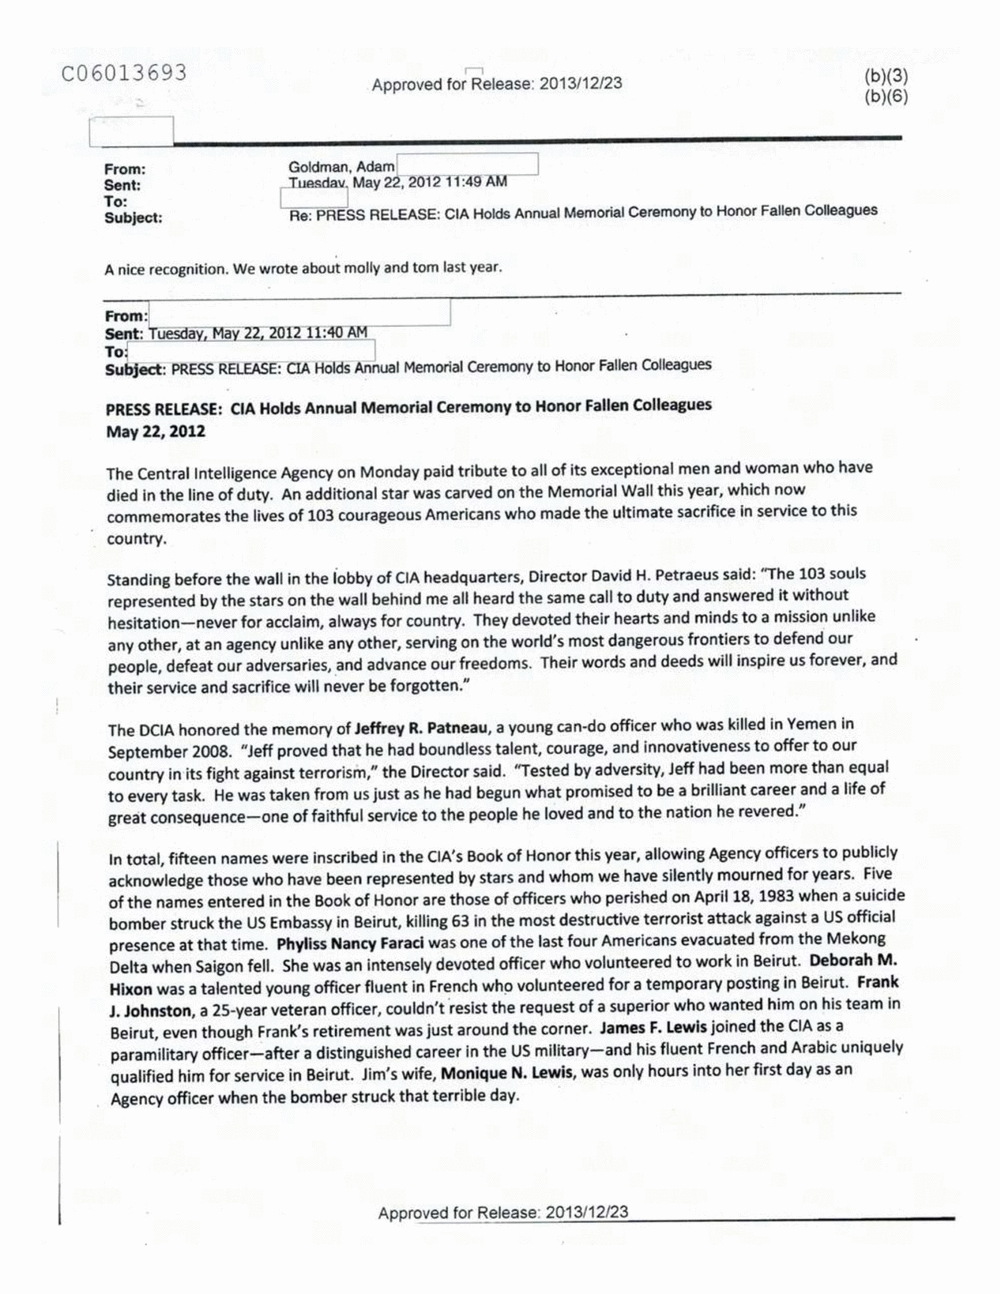 Page 554 from Email Correspondence Between Reporters and CIA Flacks